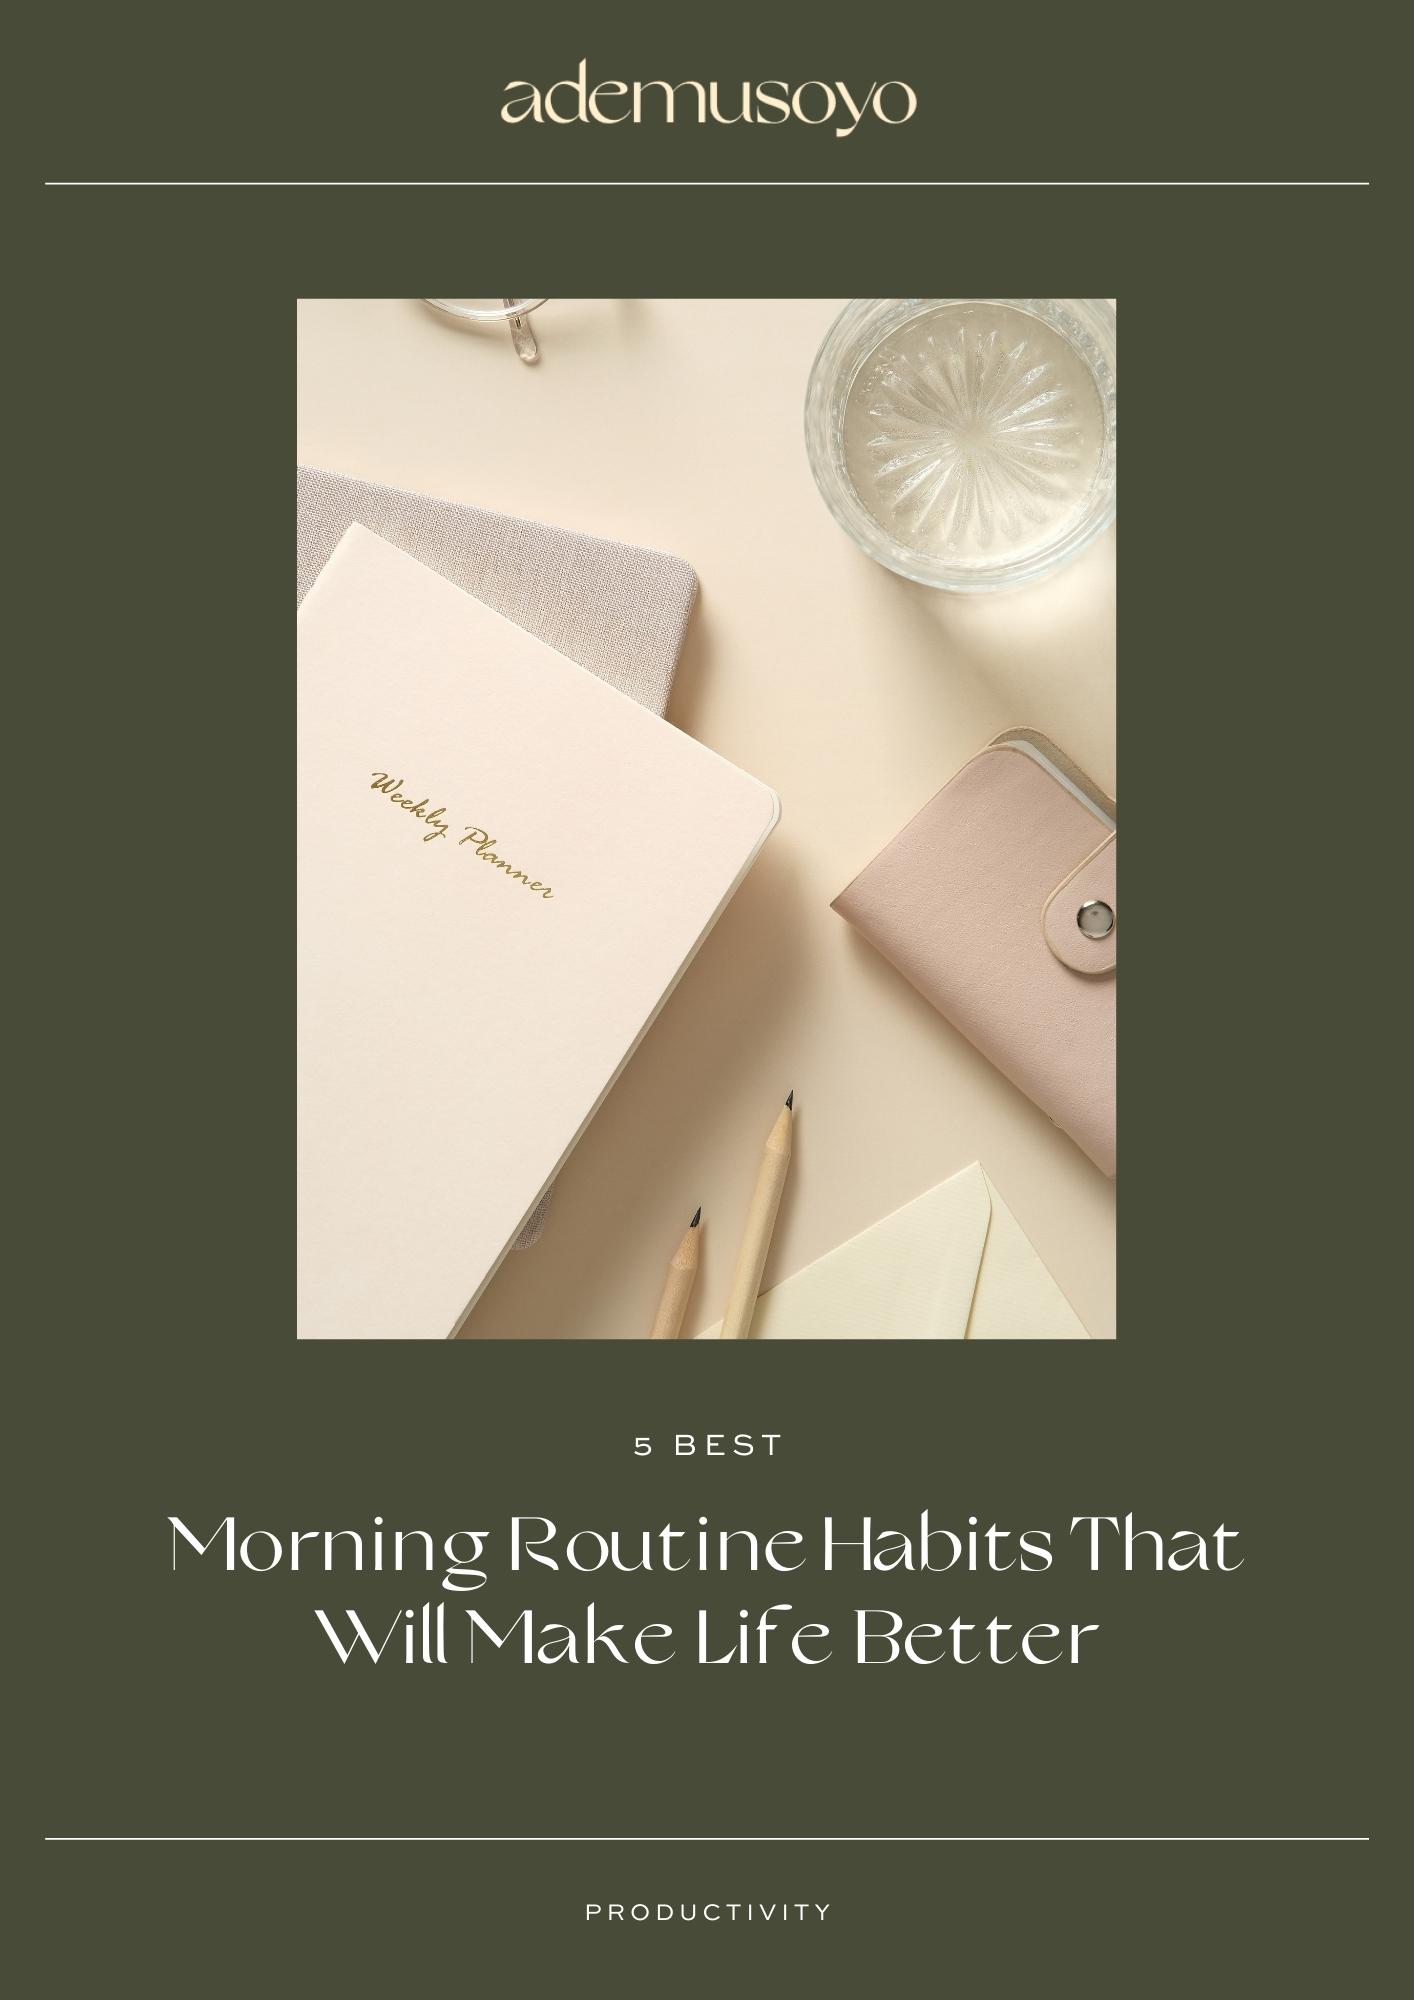 5 Best Morning Routine Habits That Will Make Life Better